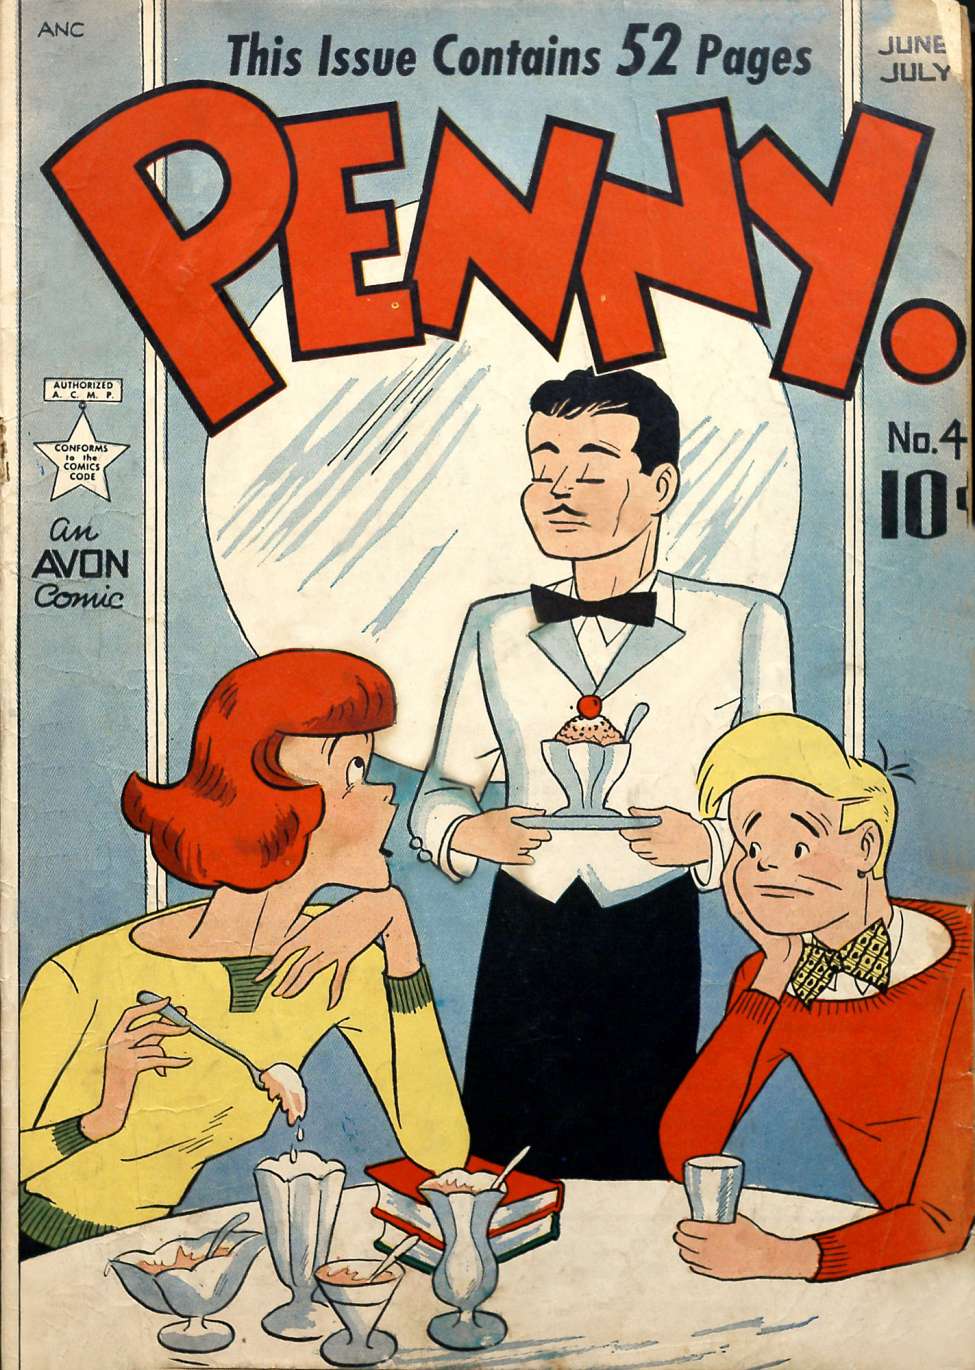 Book Cover For Penny 4 - Version 1